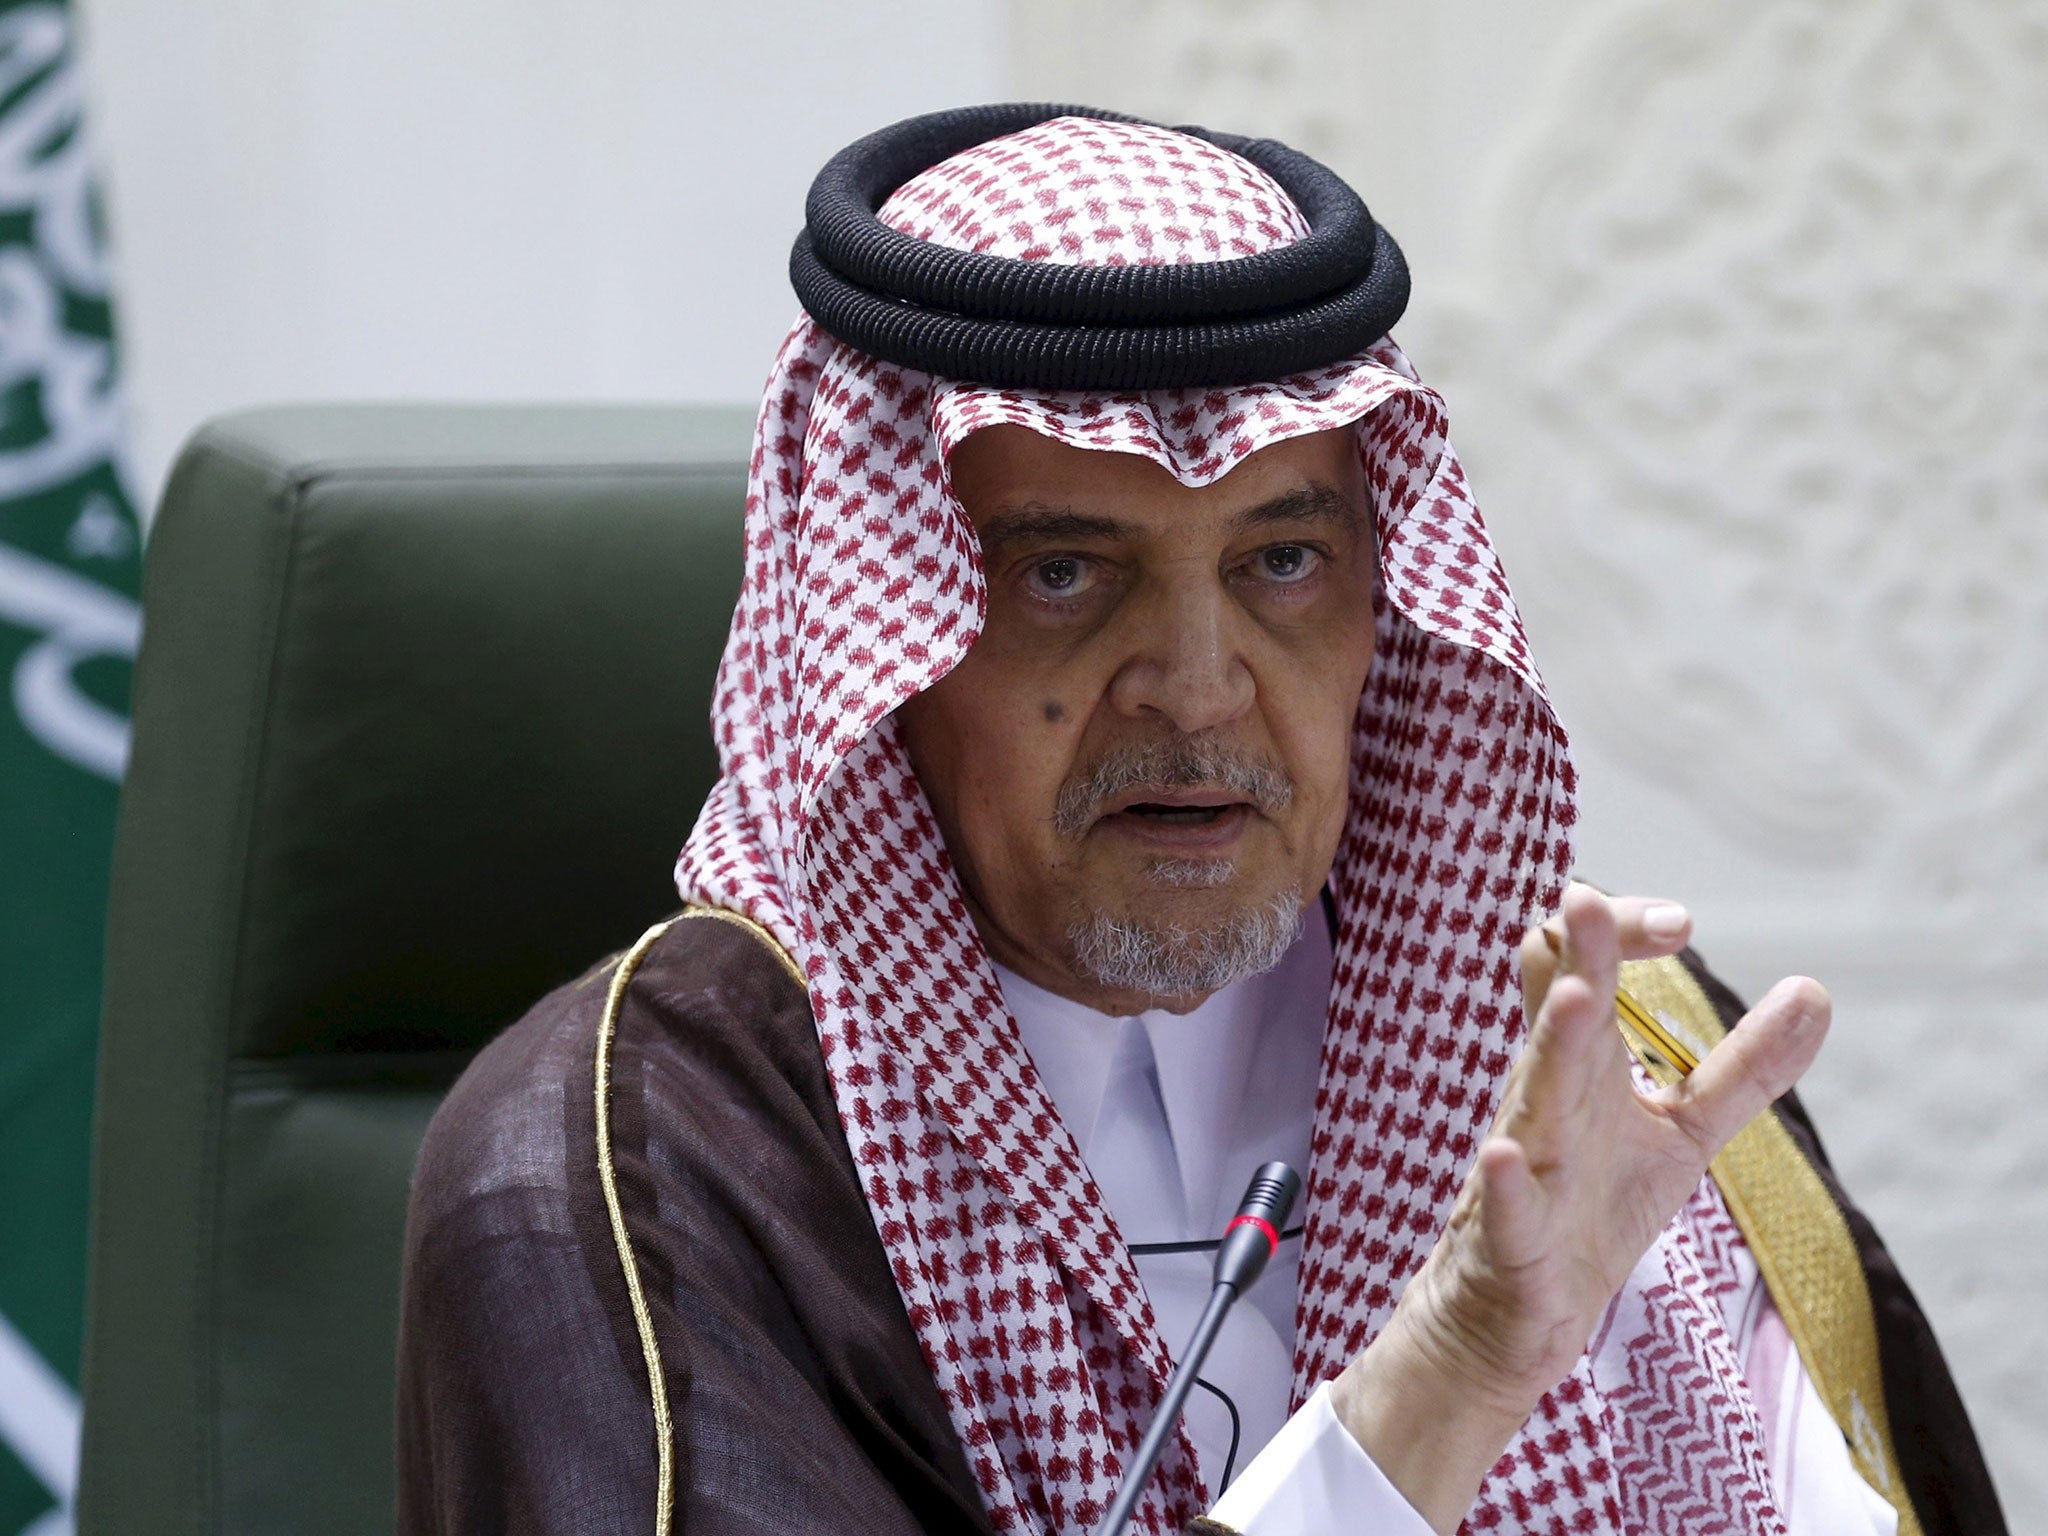 On his way out: Longstanding Saudi foreign minister Prince Saud al-Faisal gestures during a news conference in Riyadh on 12 April, 2015 (Reuters)